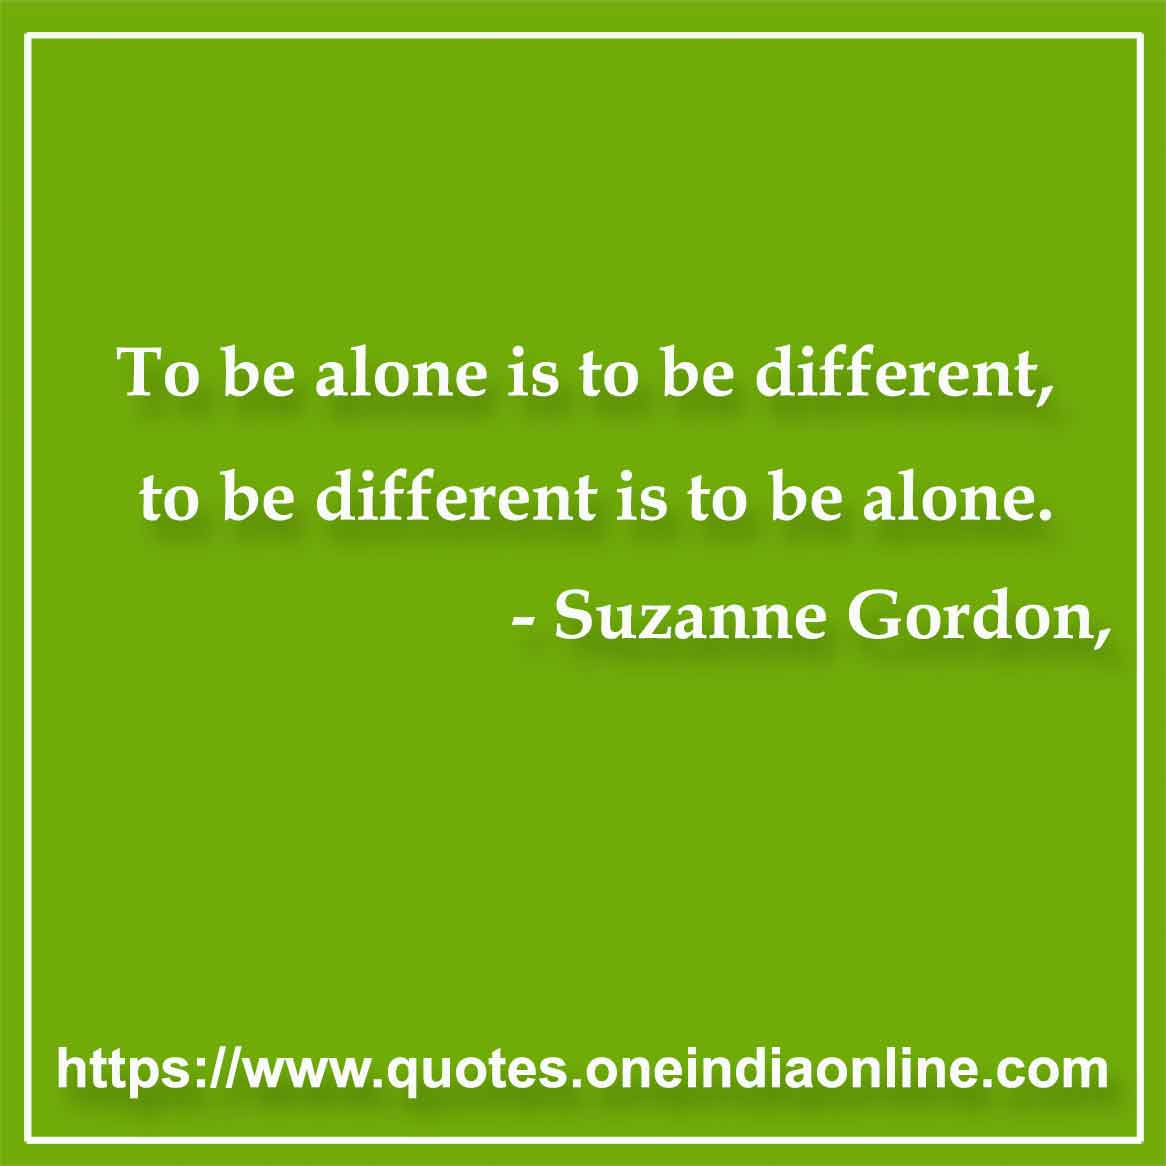 To be alone is to be different, to be different is to be alone.

- Loneliness Quotes by Suzanne Gordon